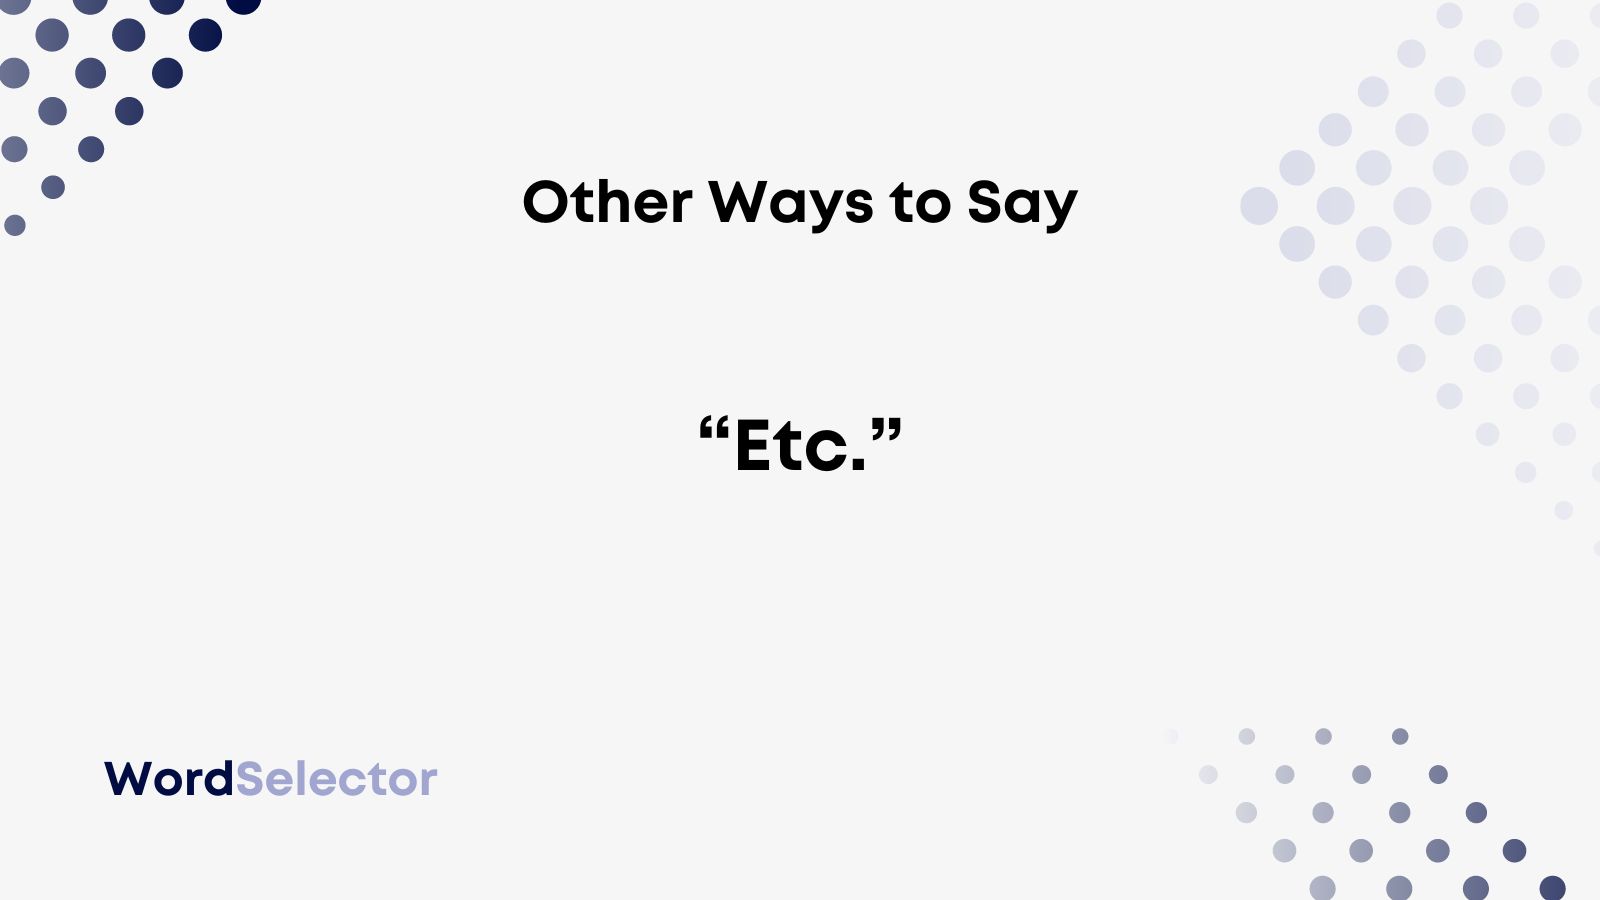 can etc be used in an essay